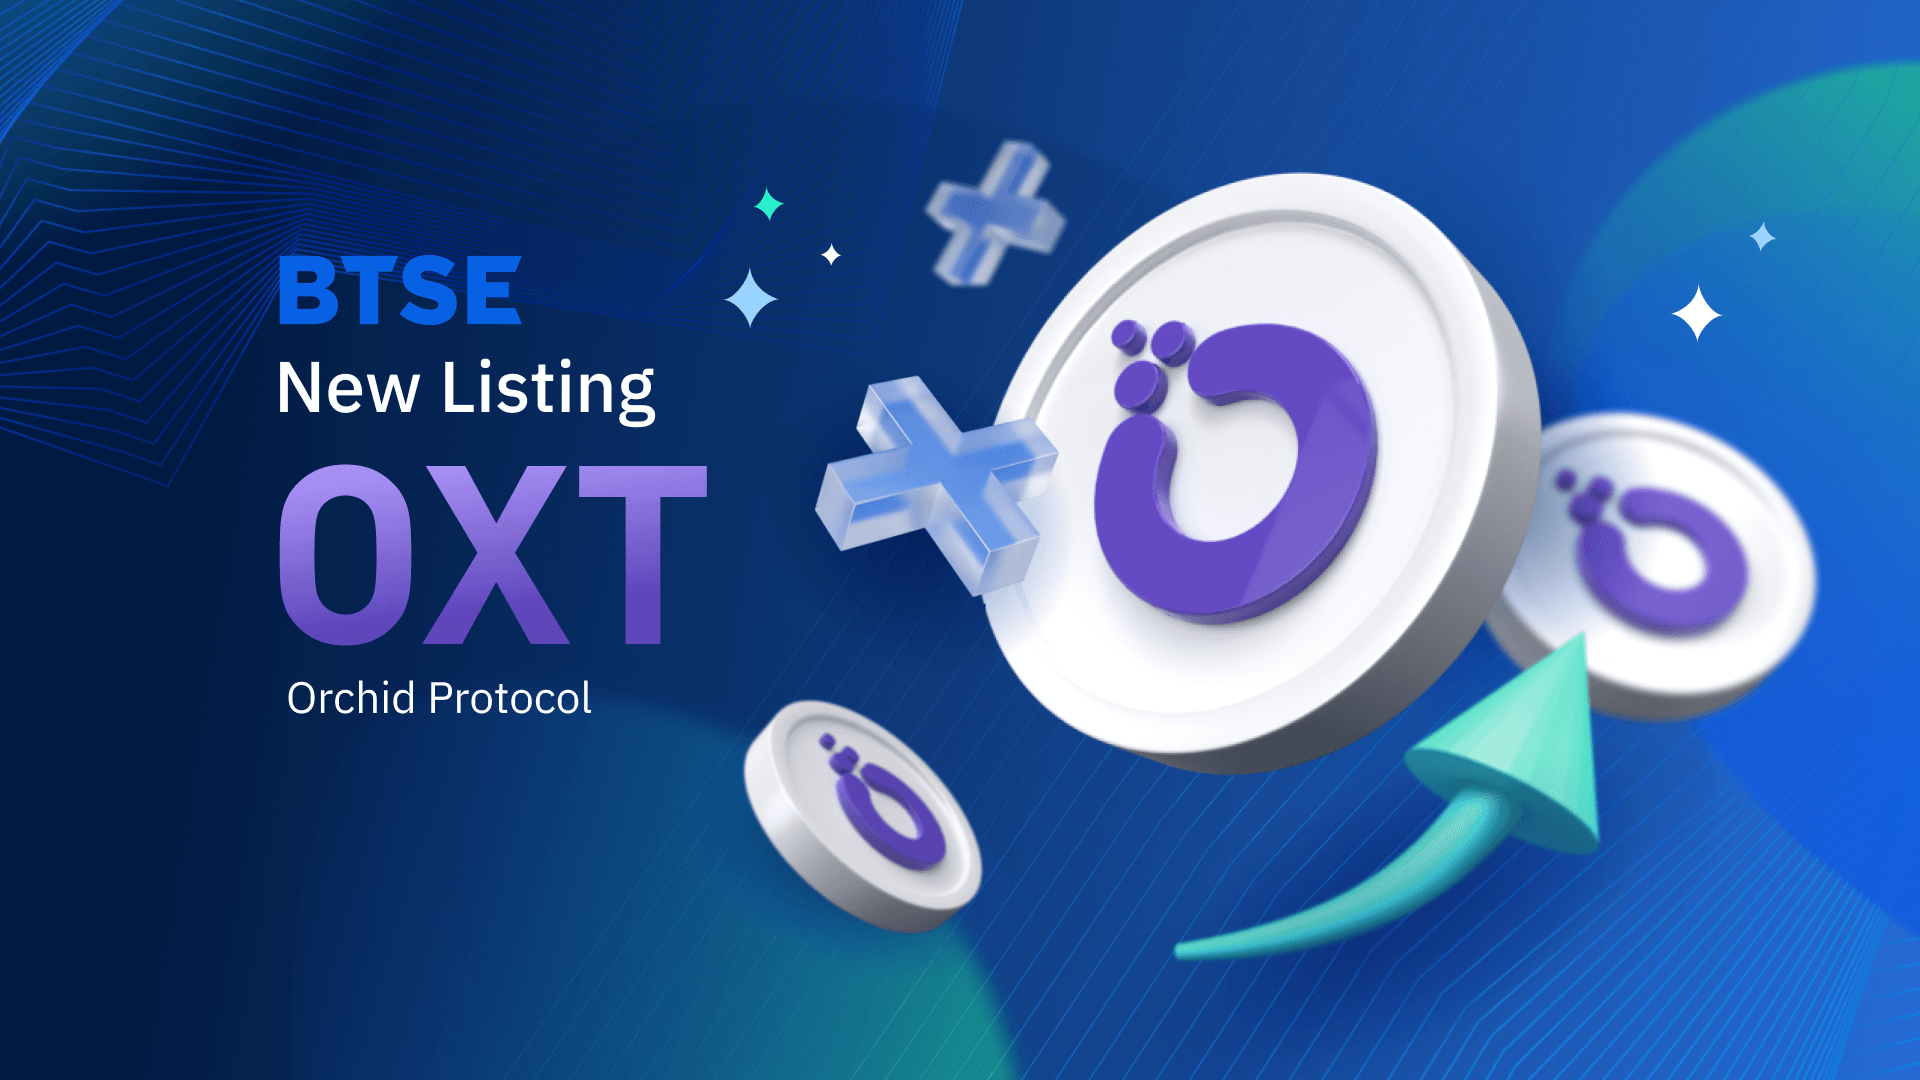 BTSE Lists Orchid Protocol (OXT)